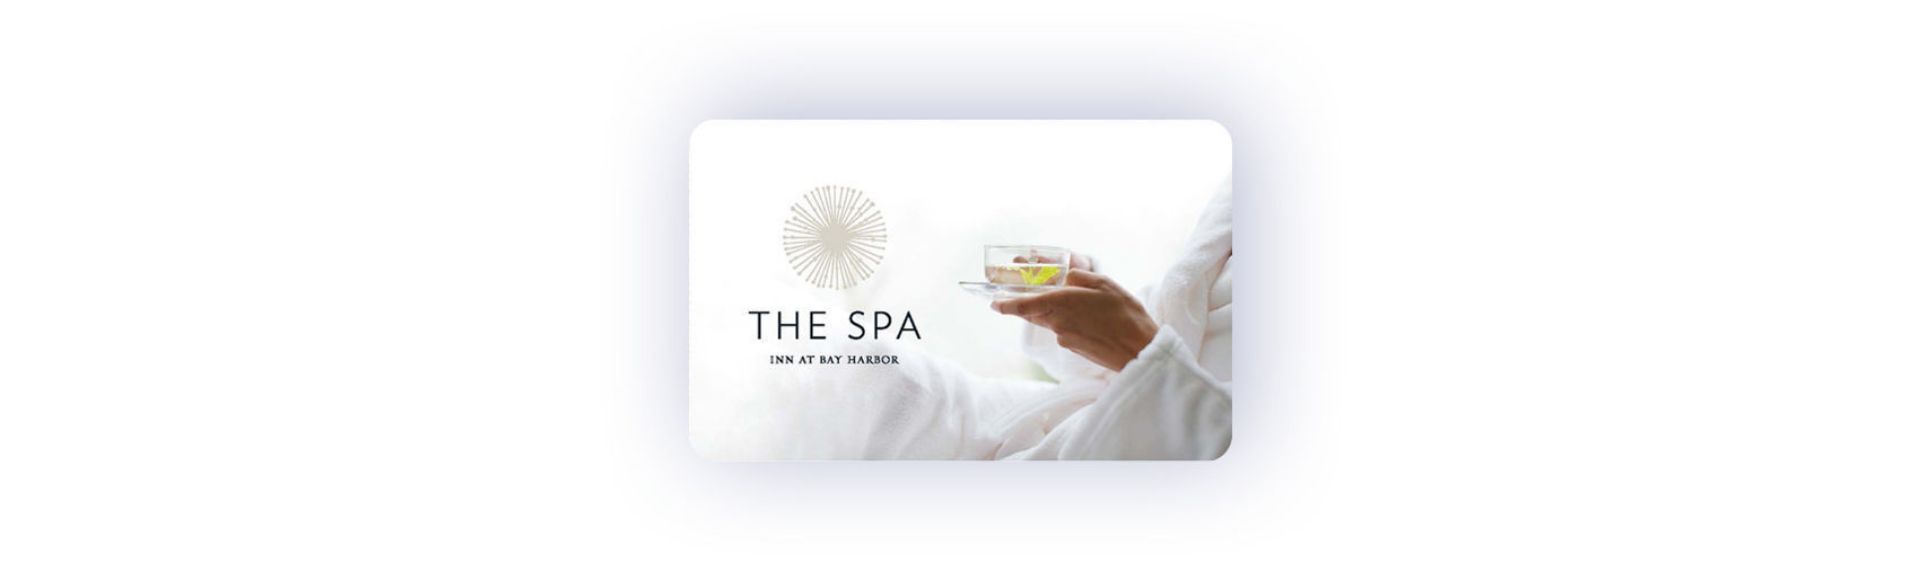 Relaxing with tea Spa Gift Card design